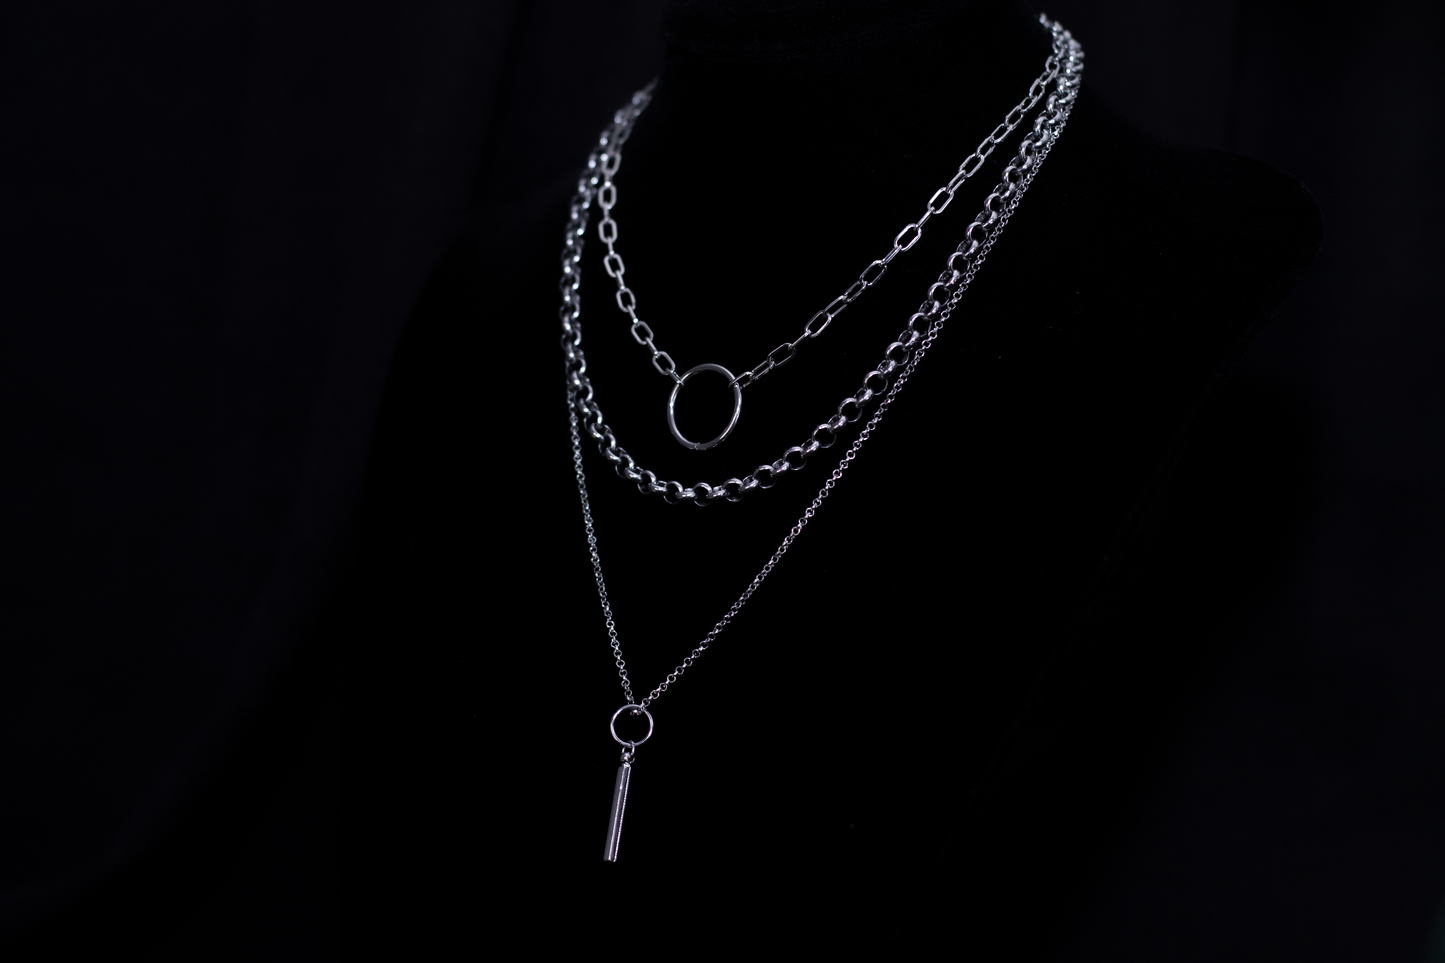 Showcasing a Myril Jewels punk multi-chain necklace with a layered design and a central hoop, this piece is a quintessential neo-goth accessory for an edgy, dark-avantgarde look.